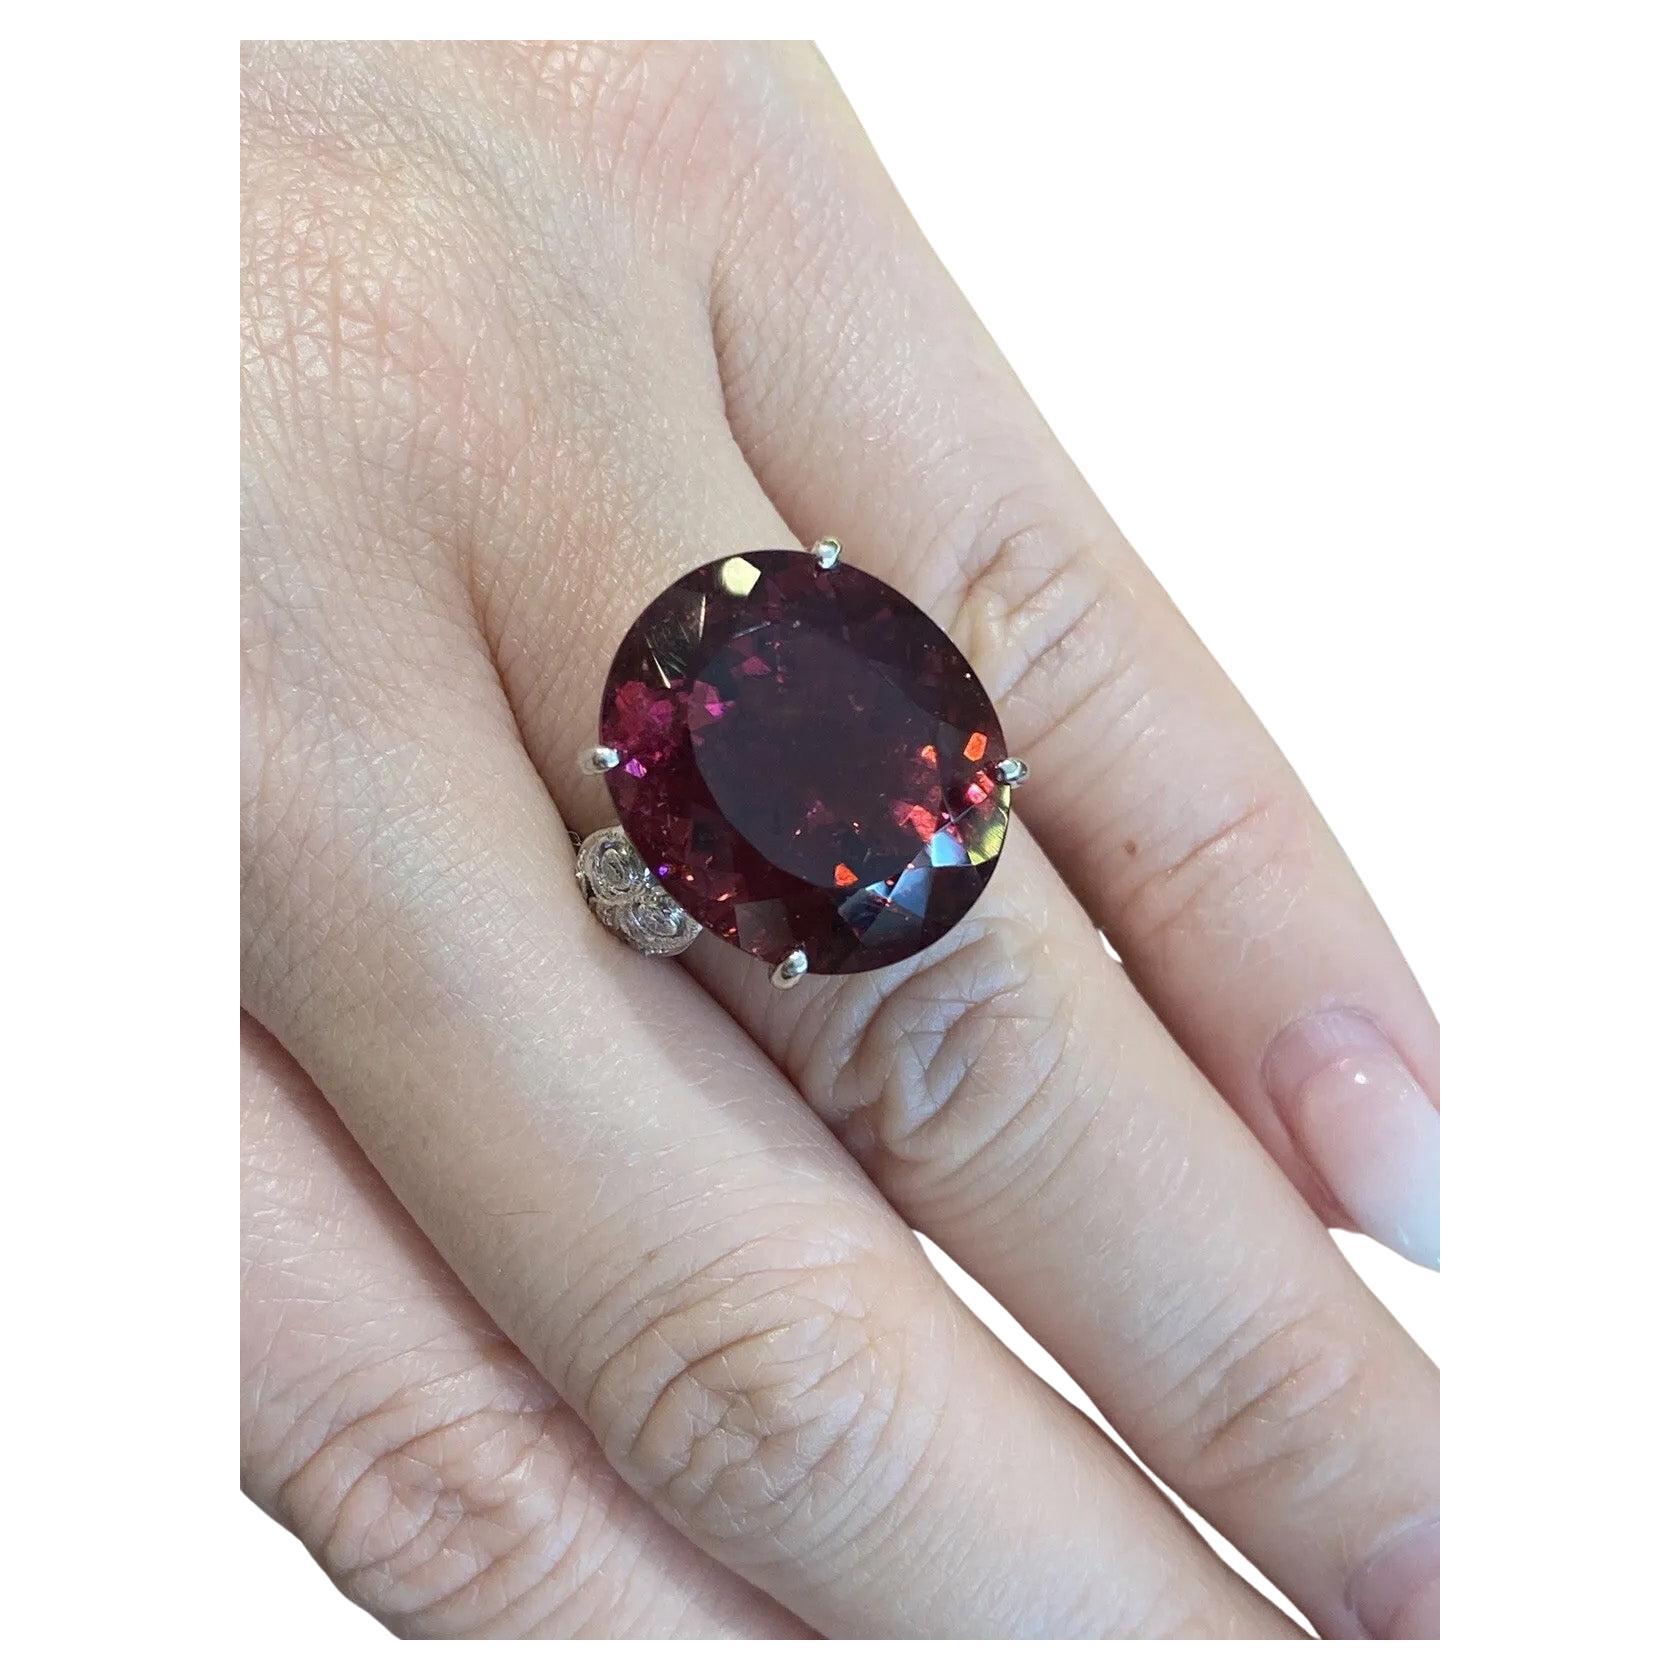 GIA Certified 27.58 Carat Oval Rubellite Ring with Diamonds in Platinum

Rubellite and Diamond Ring features an purplish red Oval shaped Rubellite accented by 24 Round Brilliant Diamonds set in Platinum.

Total rubellite weight is 27.58 carats and